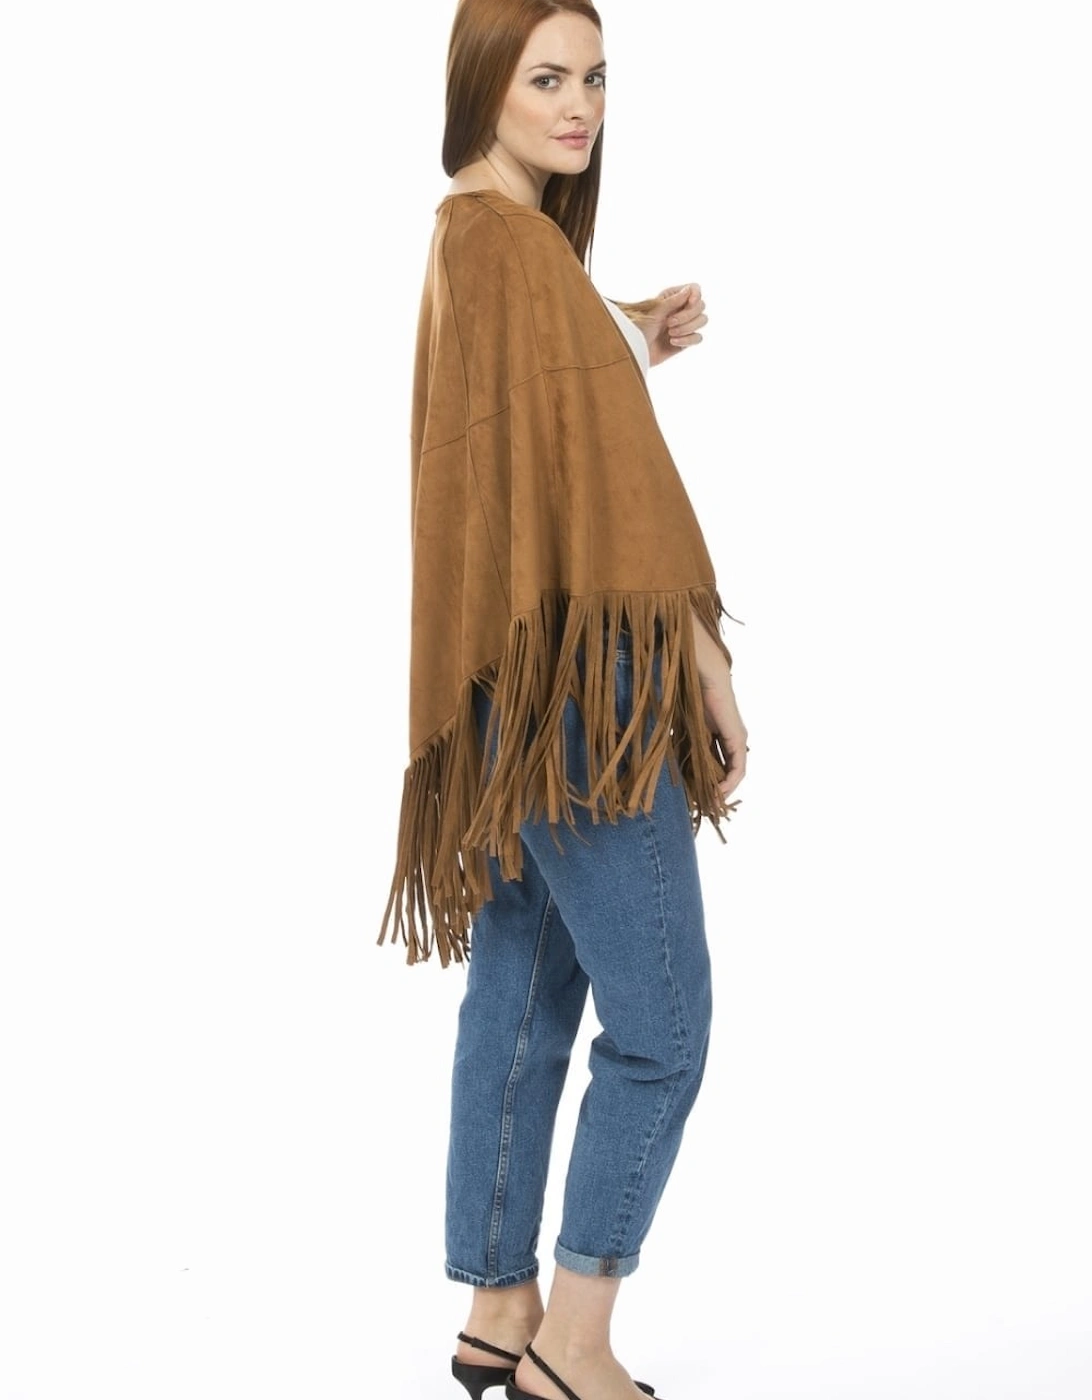 Mocha Faux Suede Tassel Cape With Pockets